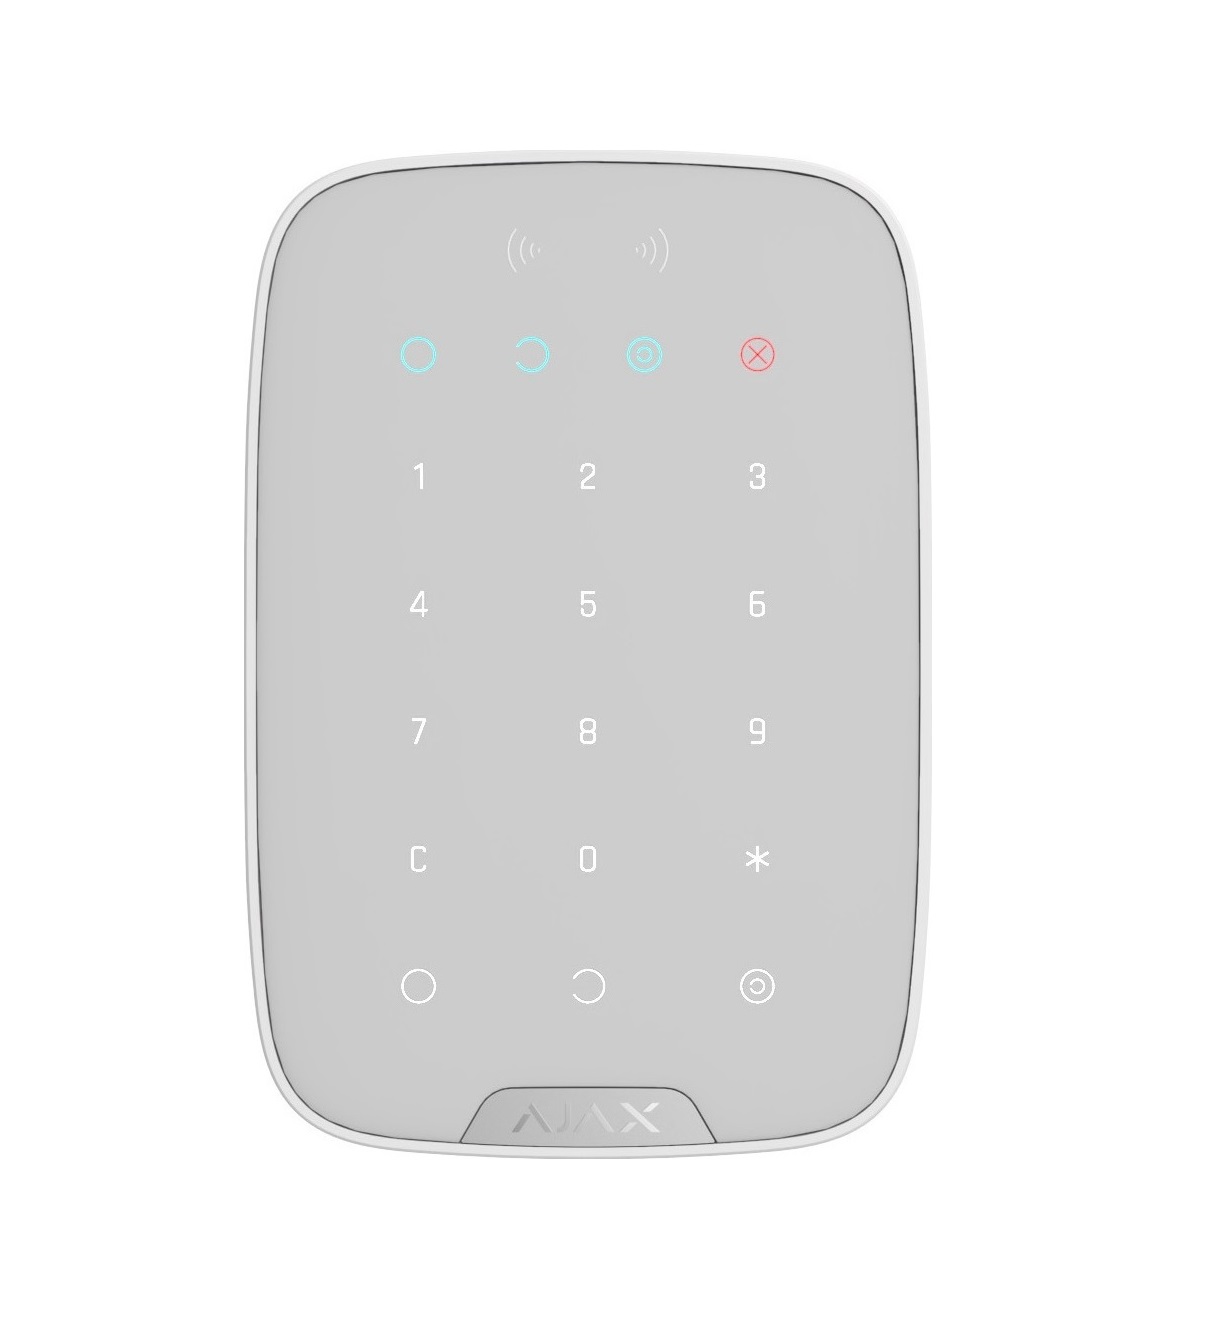 Ajax KeyPad Plus White Wireless Touch Keyboard with Built-in Proximity Reader